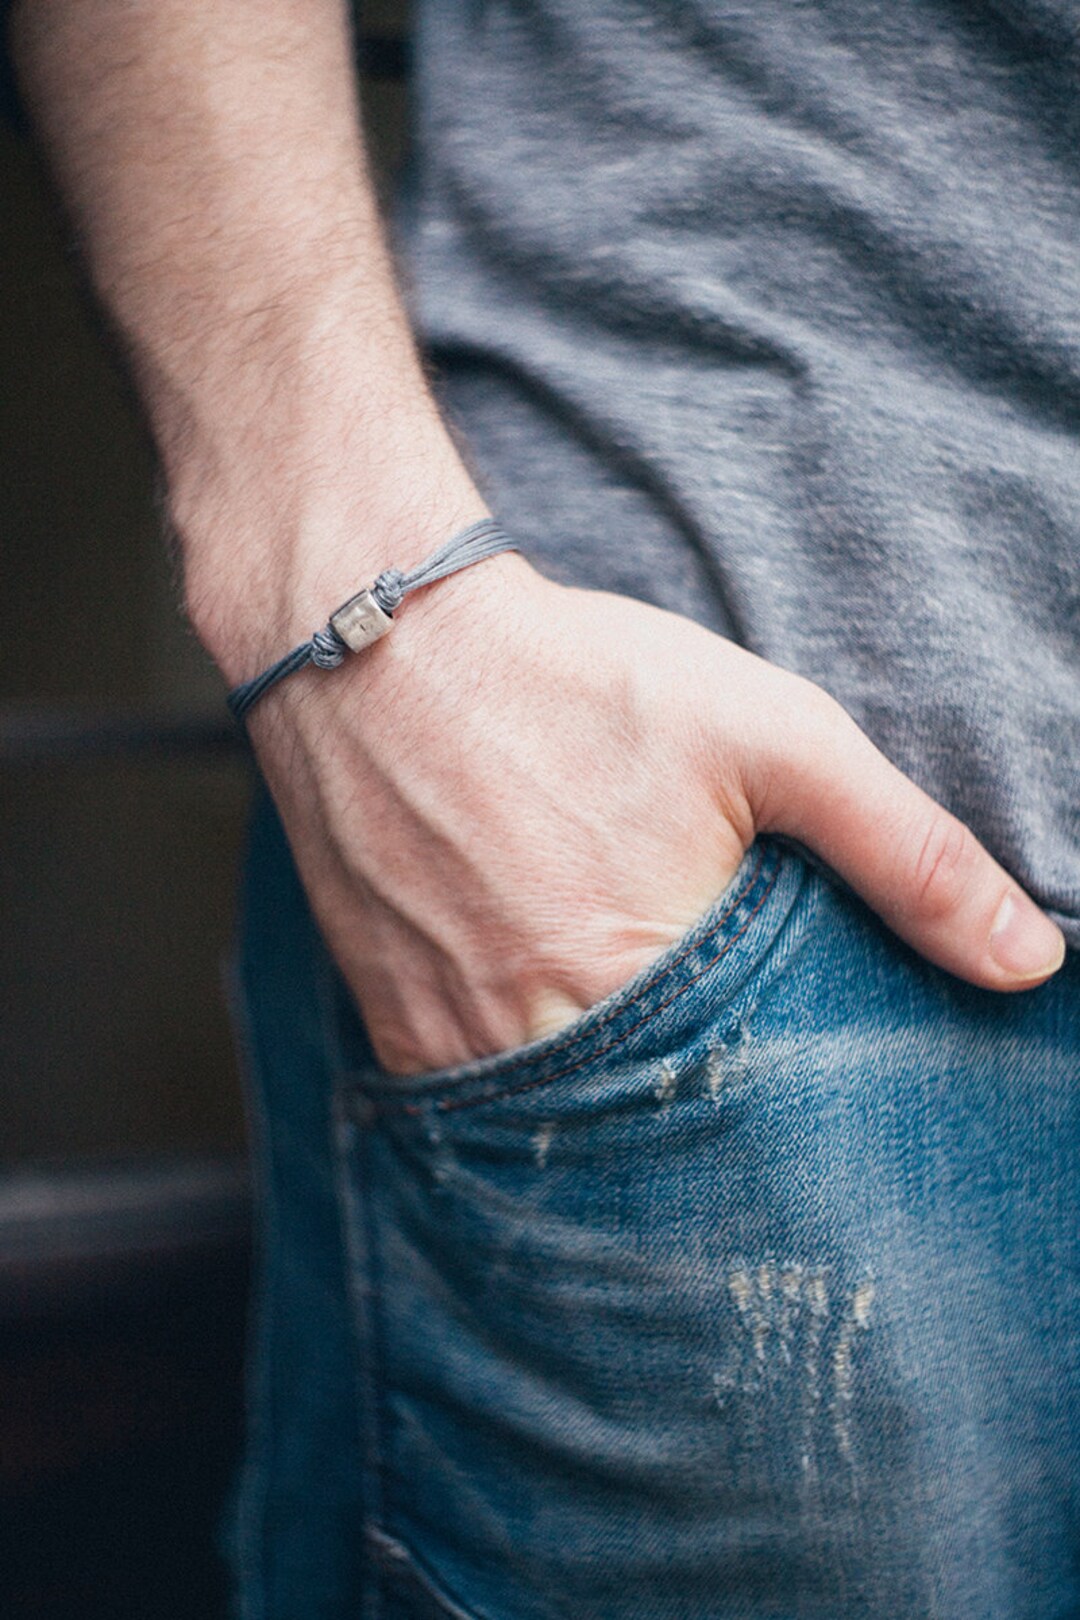 Men's Bracelet With a Silver Tube Charm and a Gray Cord - Etsy